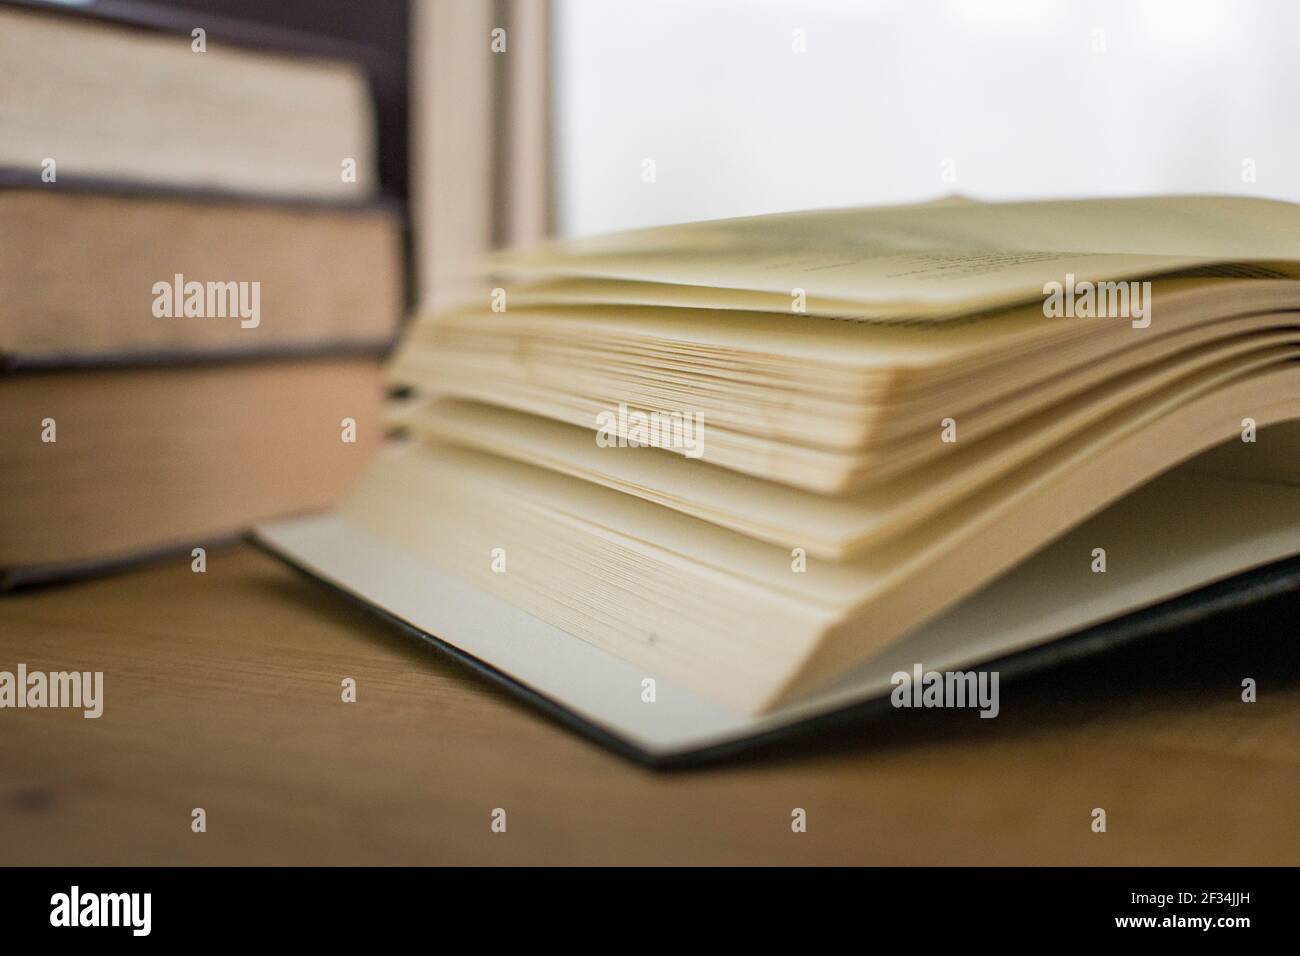 Hard cover books stacked on top of each other on top of a desk, studying material Stock Photo